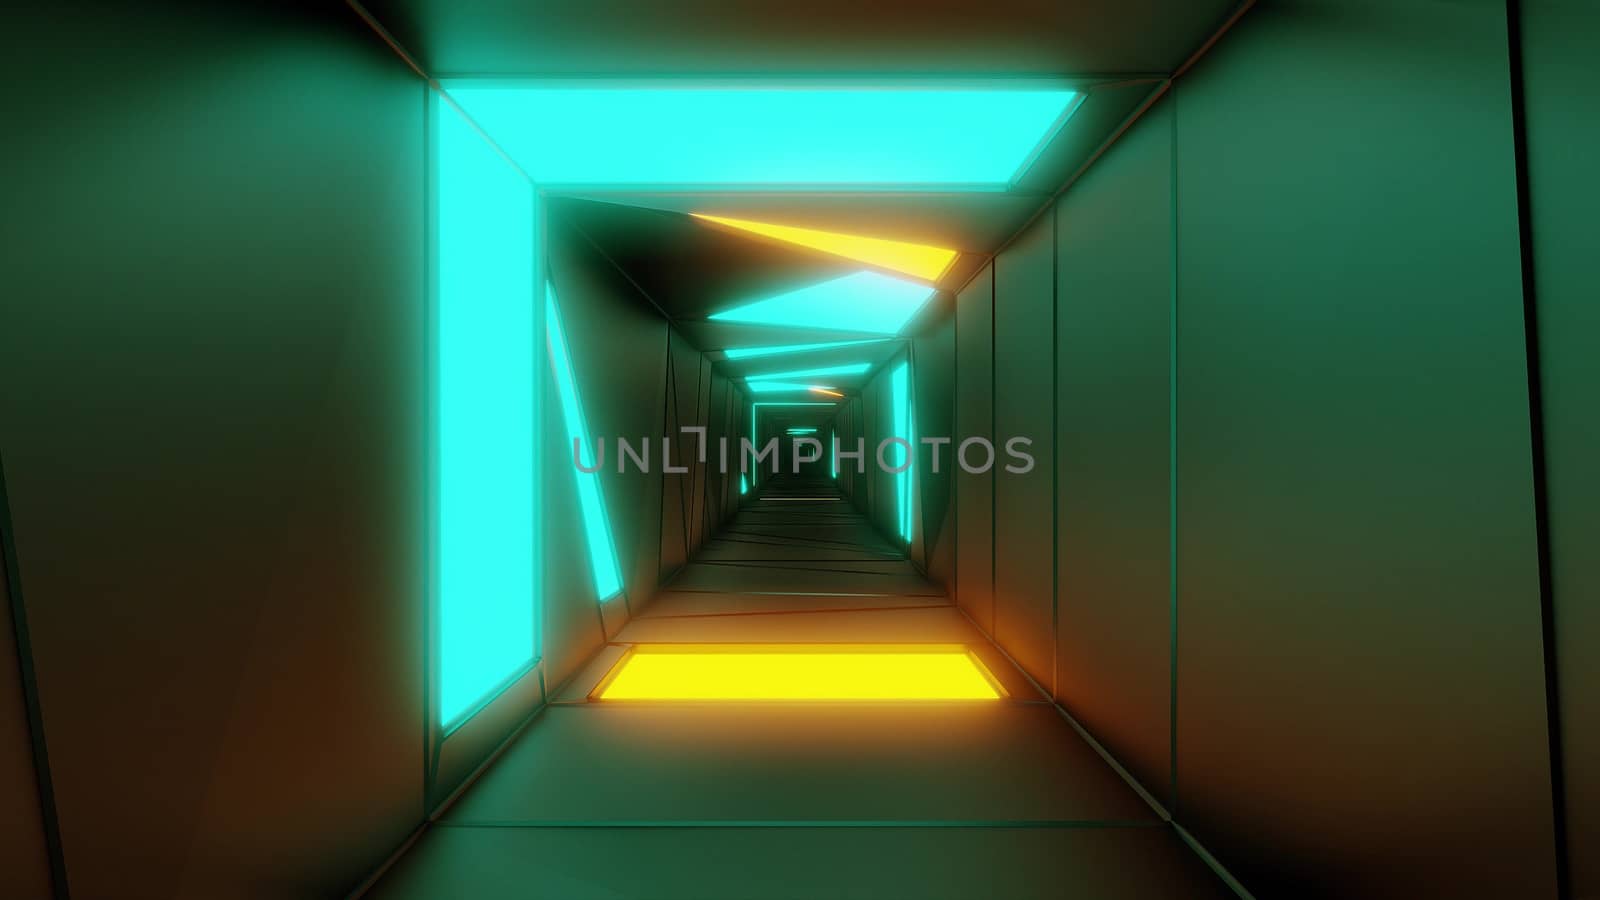 highly abstract design tunnel corridor with glowing light patterns 3d illustration wallpaper background by tunnelmotions